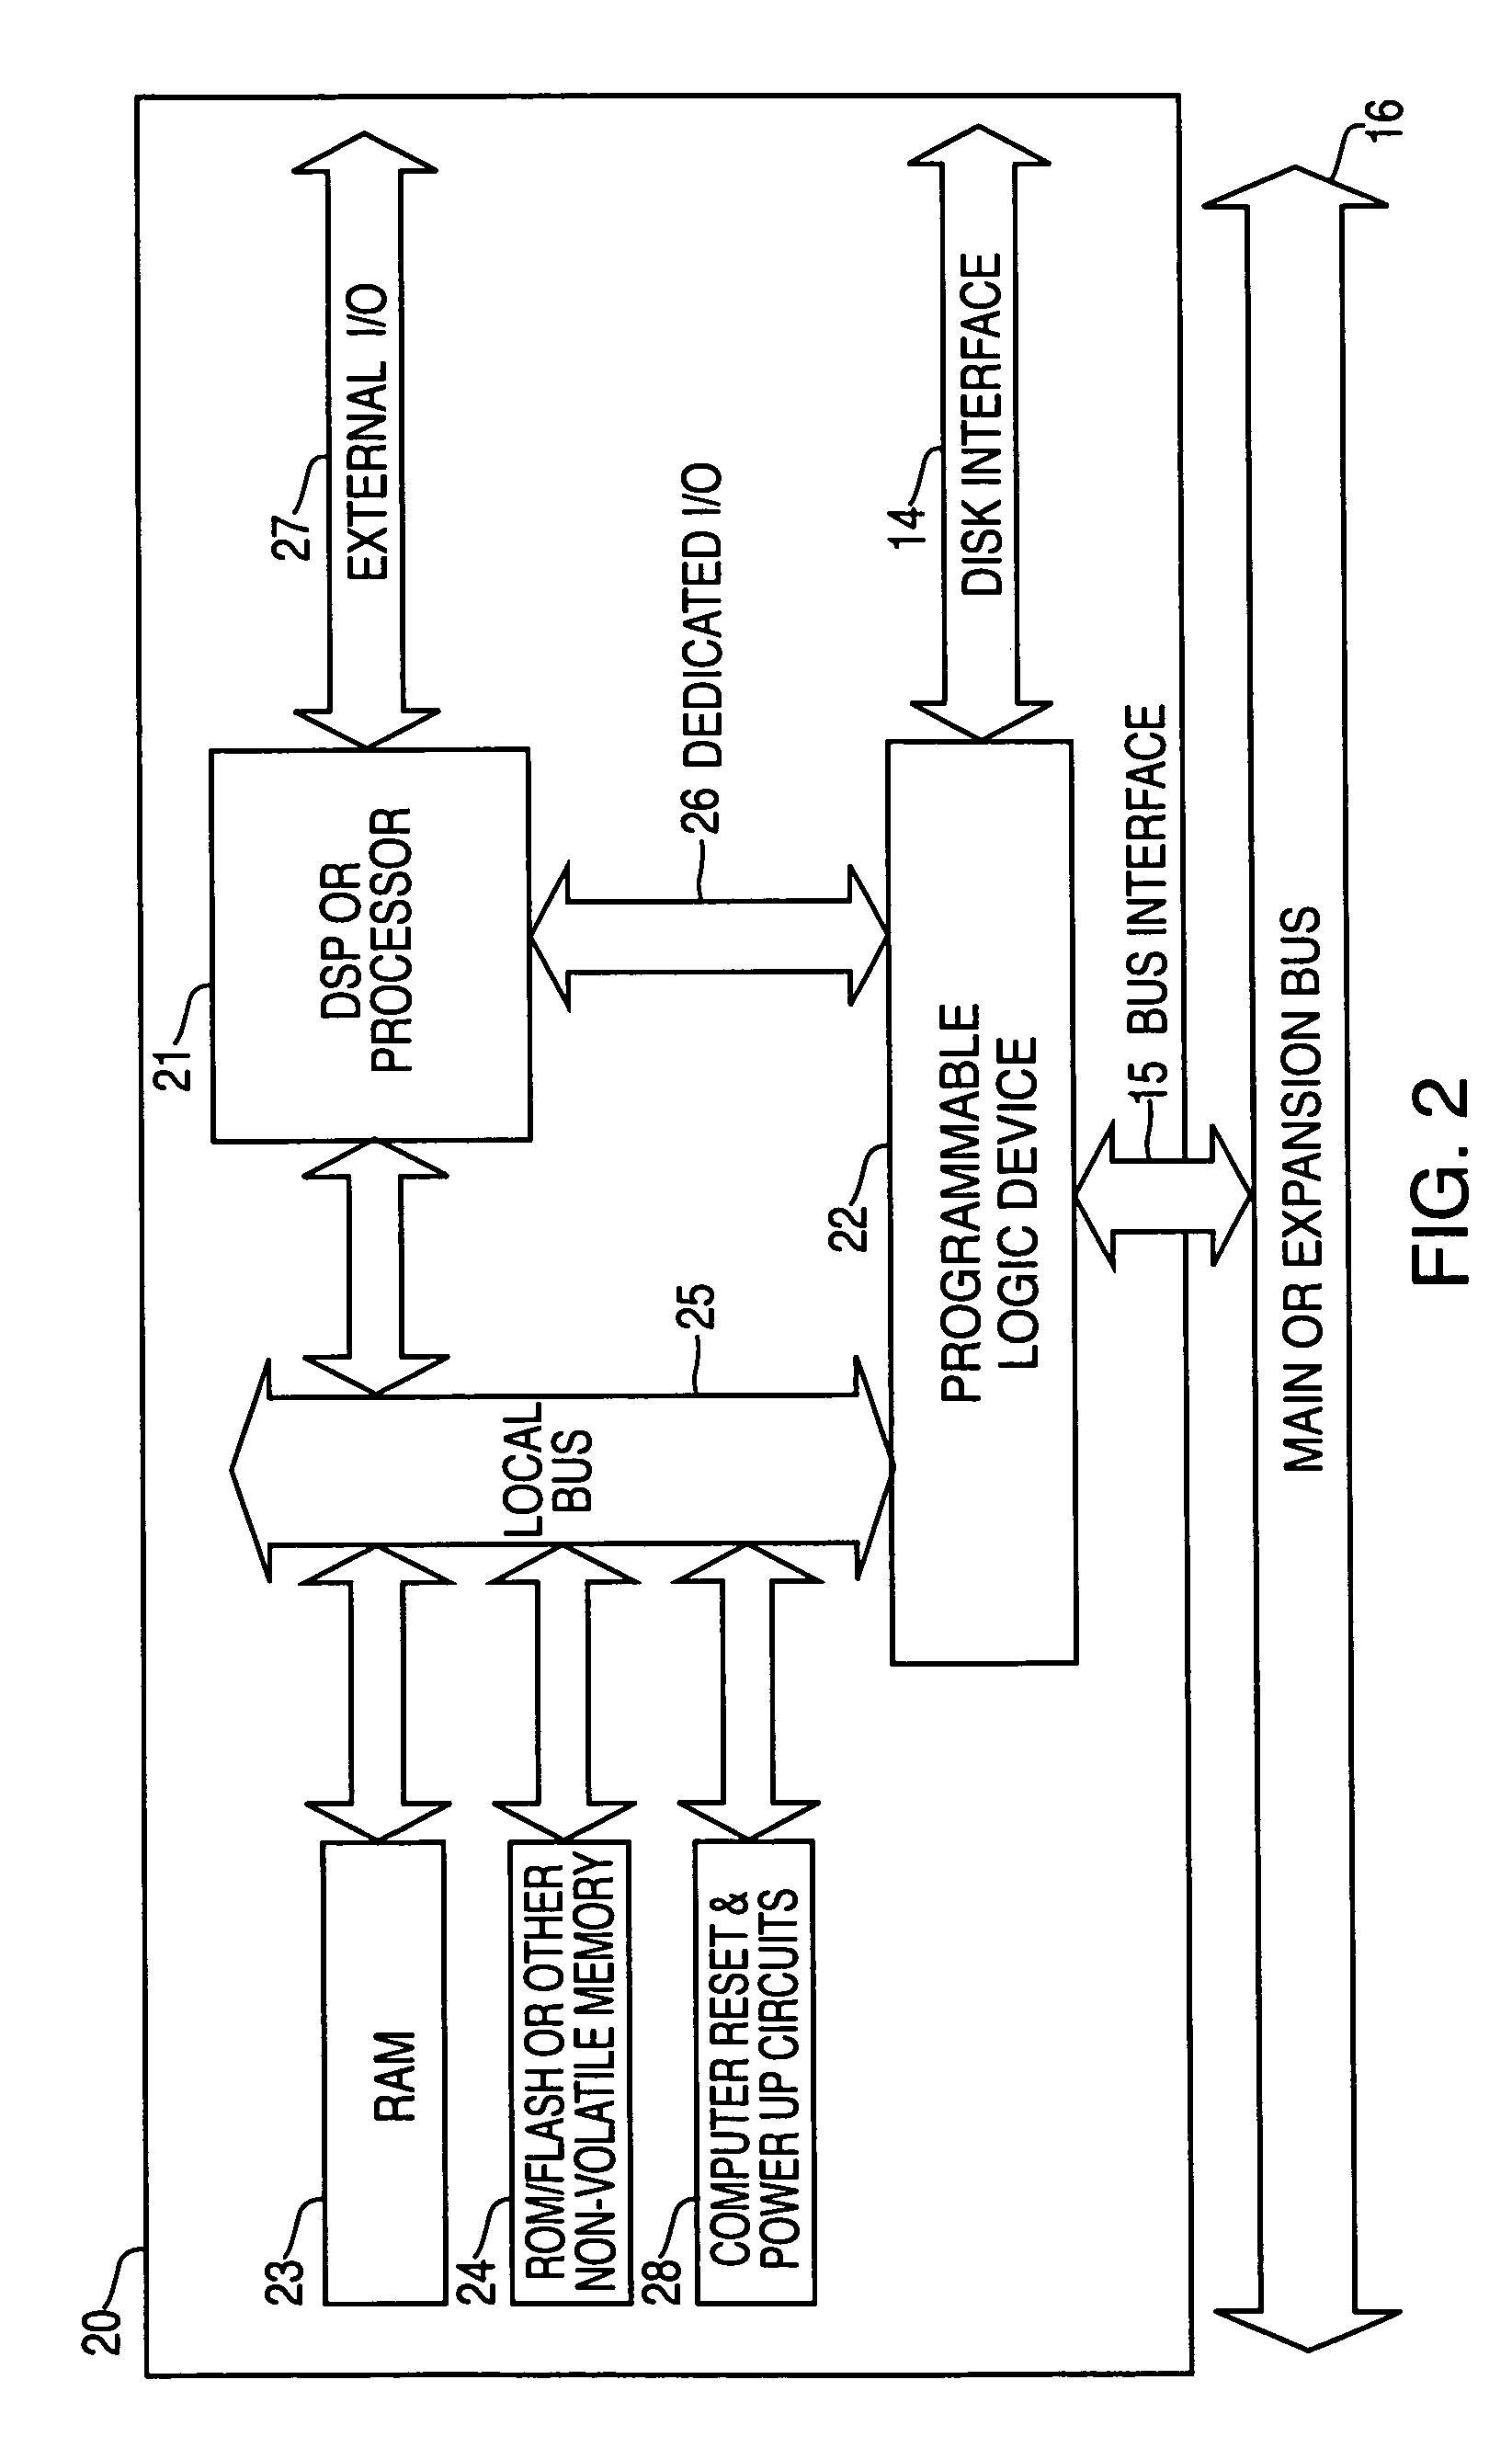 Systems and methods for accelerated loading of operating systems and application programs